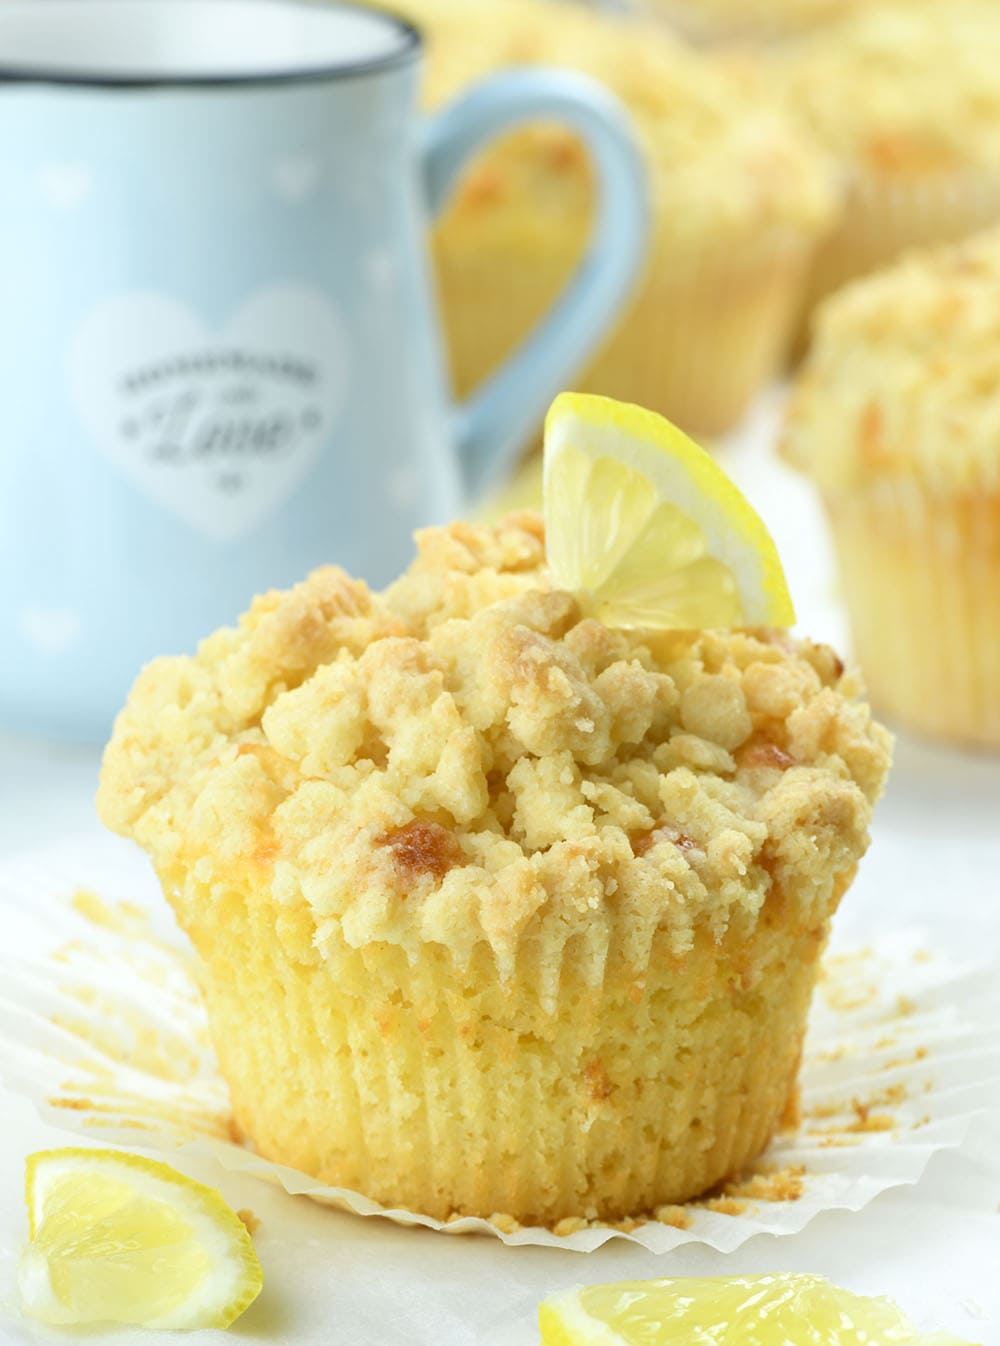 Lemon Curd Muffins with streusel crumb topping, drizzled with sweet glaze.